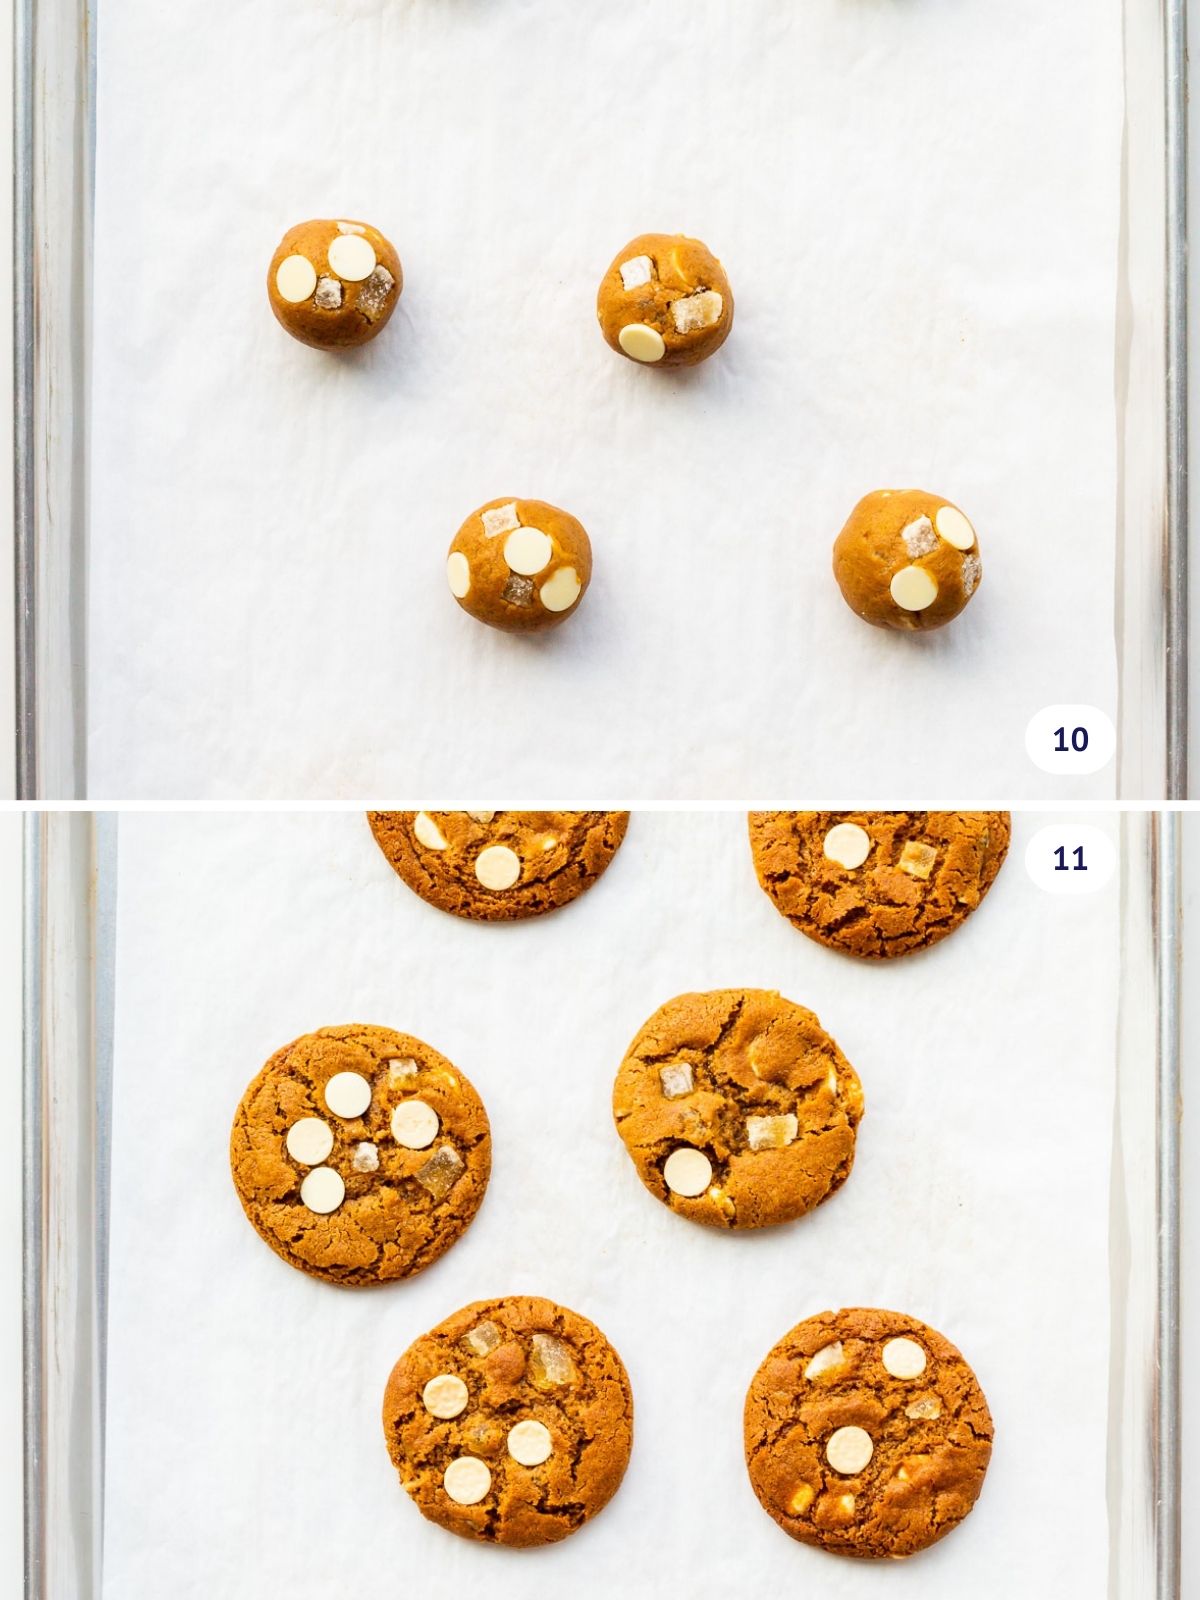 Ginger cookies with white chocolate before and after baking on a parchment paper-lined sheet pan.